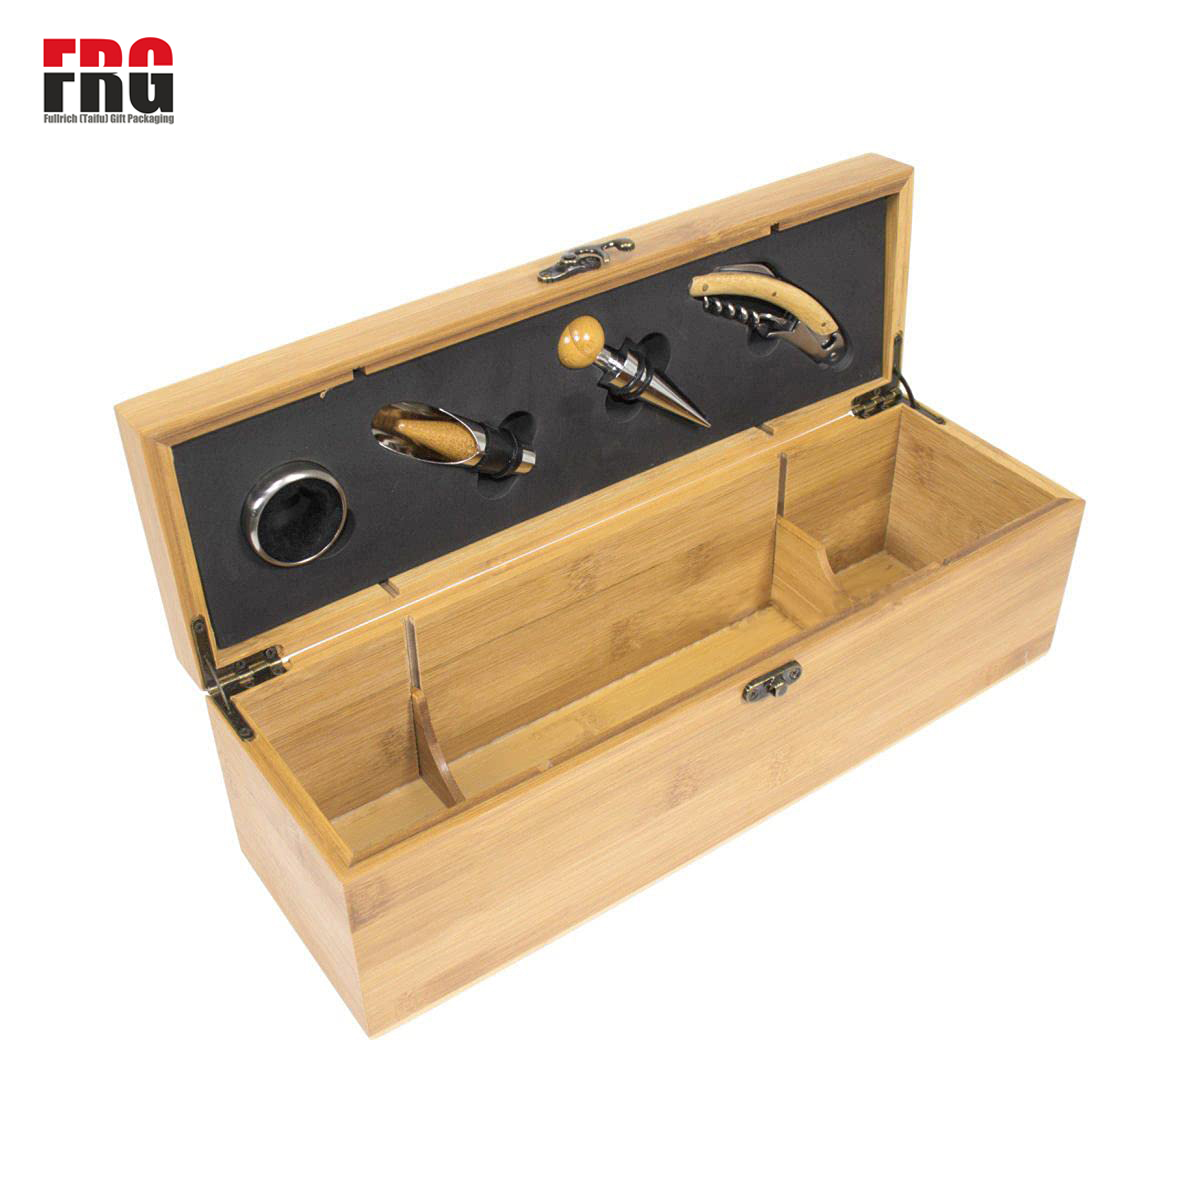 Fullrich Factory Customize Bamboo Wine Box with 4 Tools(Accessories) wood Bamboo Gift Set, elegantly, 1 Drip Ring 1 Corkscrew, 1 Wine Pourer and 1 Wine Stopper, Wood, Safe, Store wine, High quality material